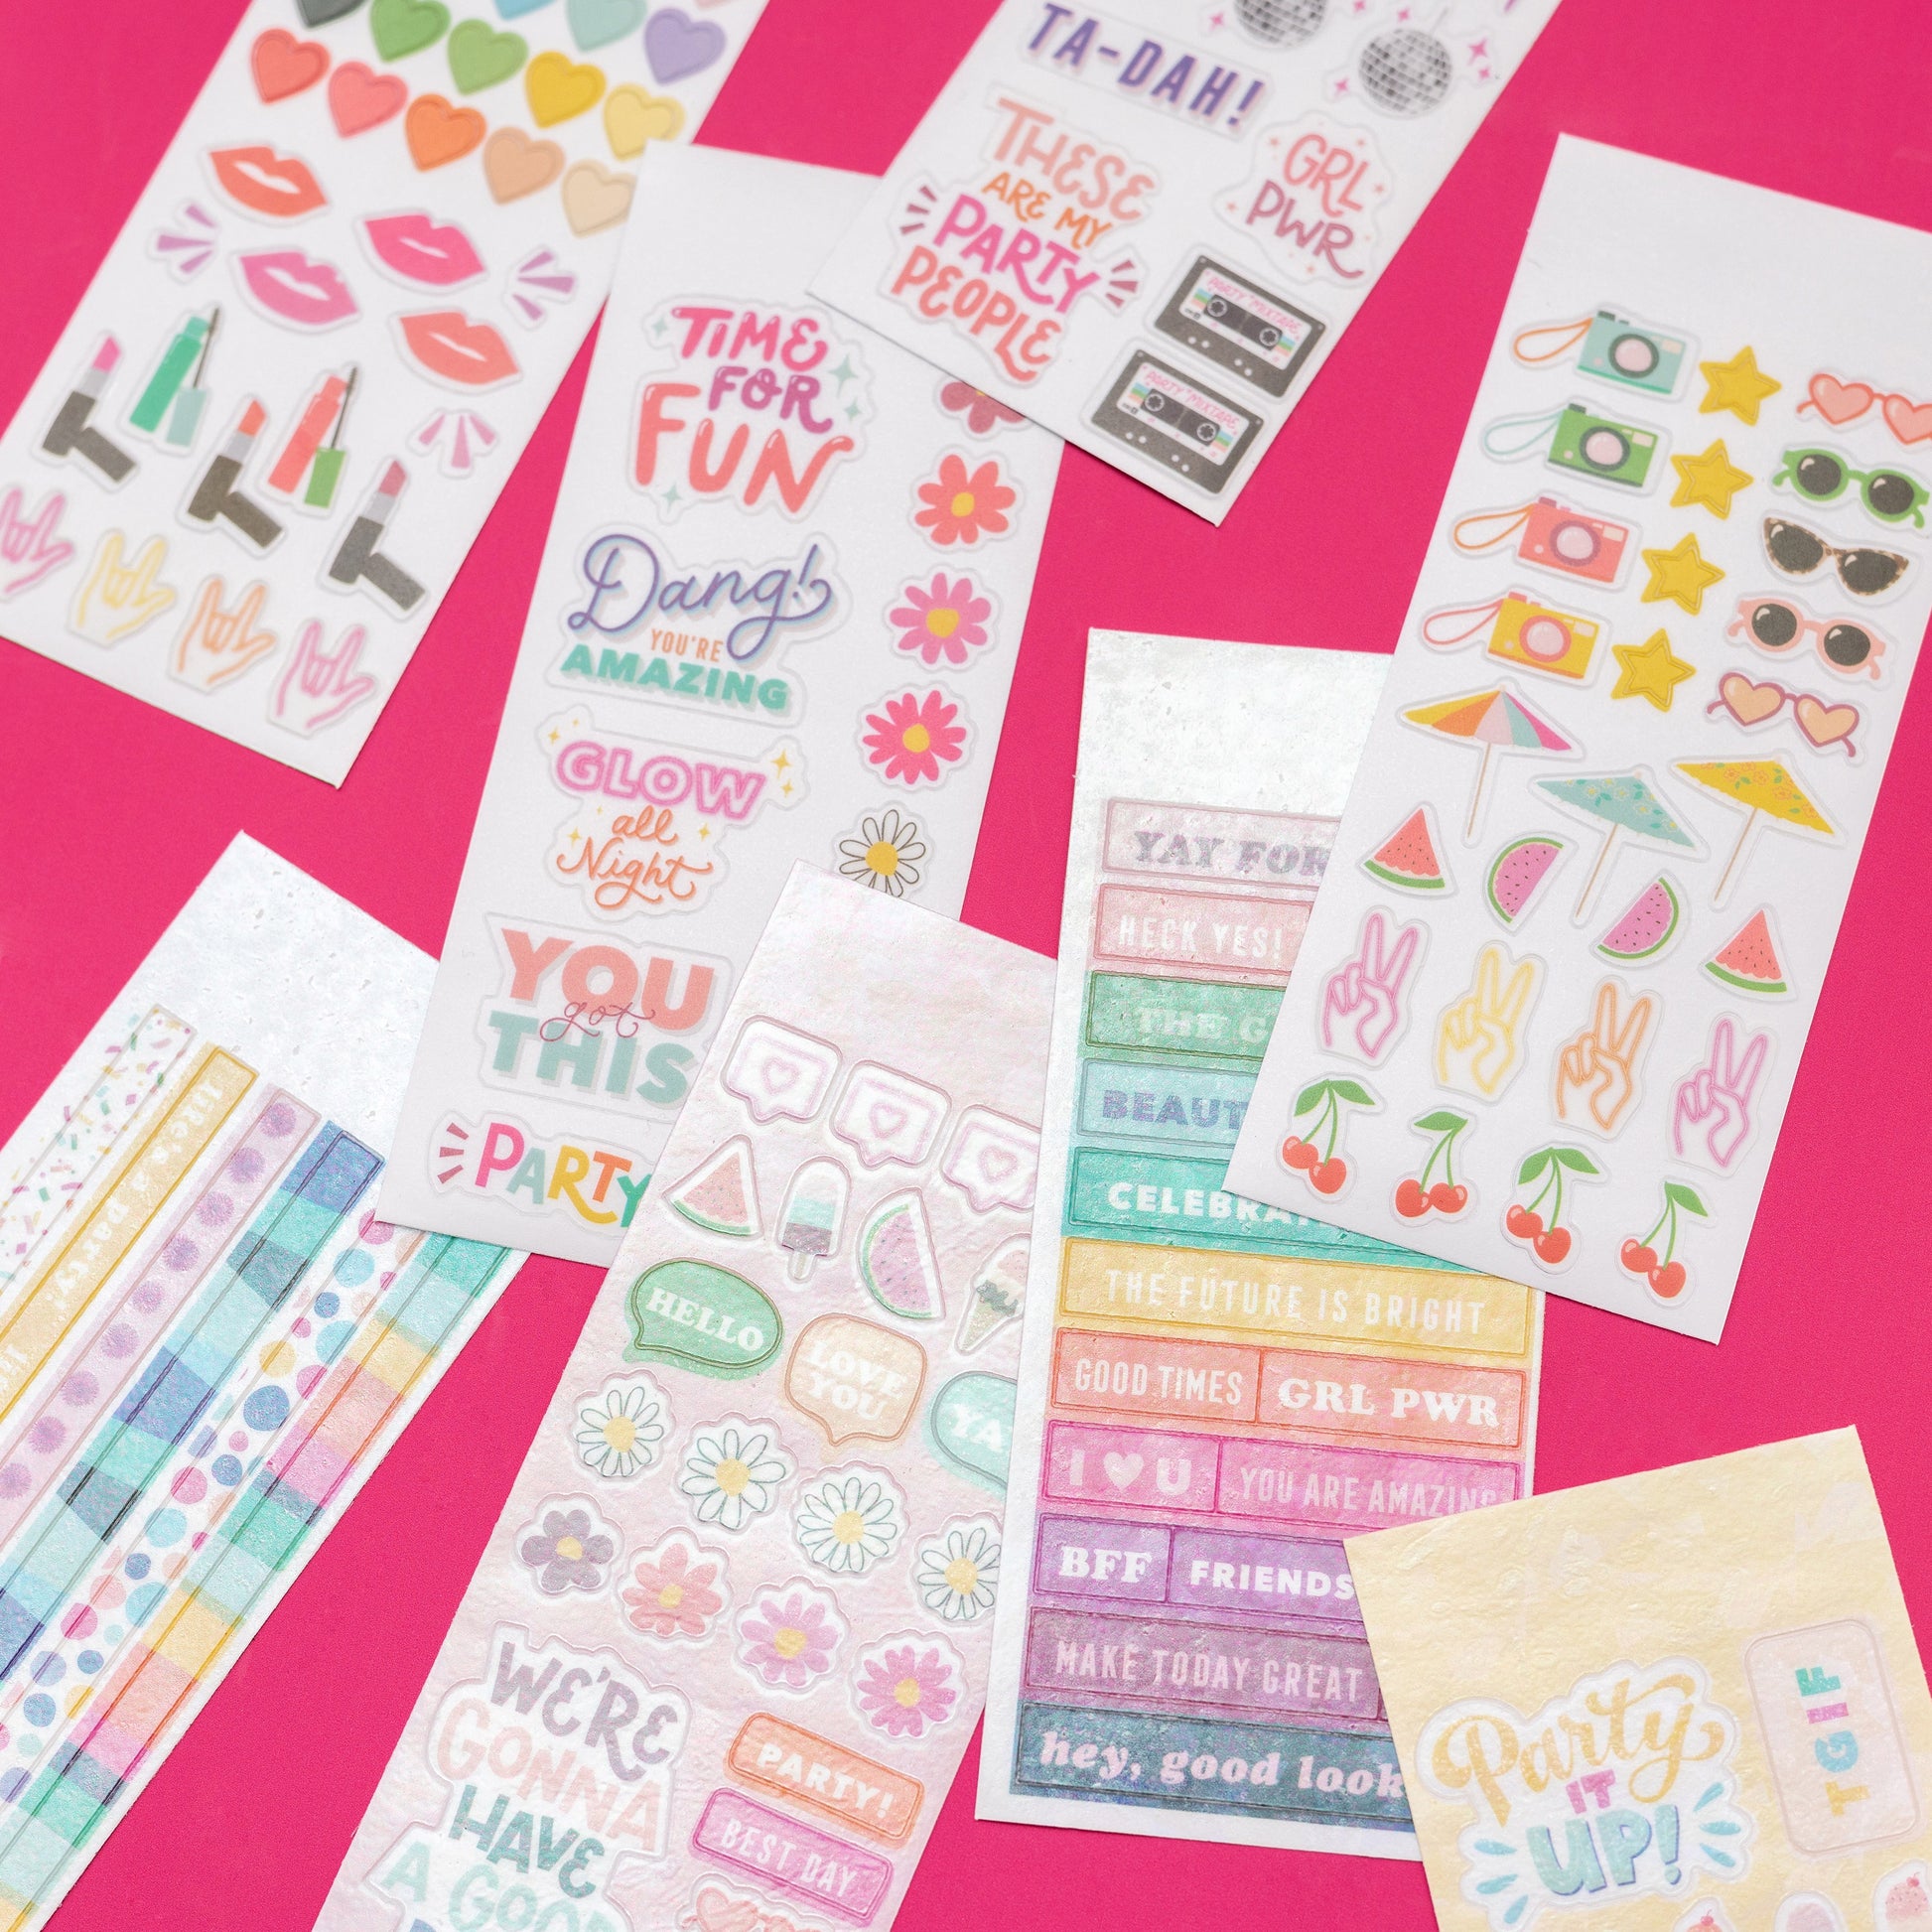 American Crafts Gold Foil Sticker Book - Kelly Creates